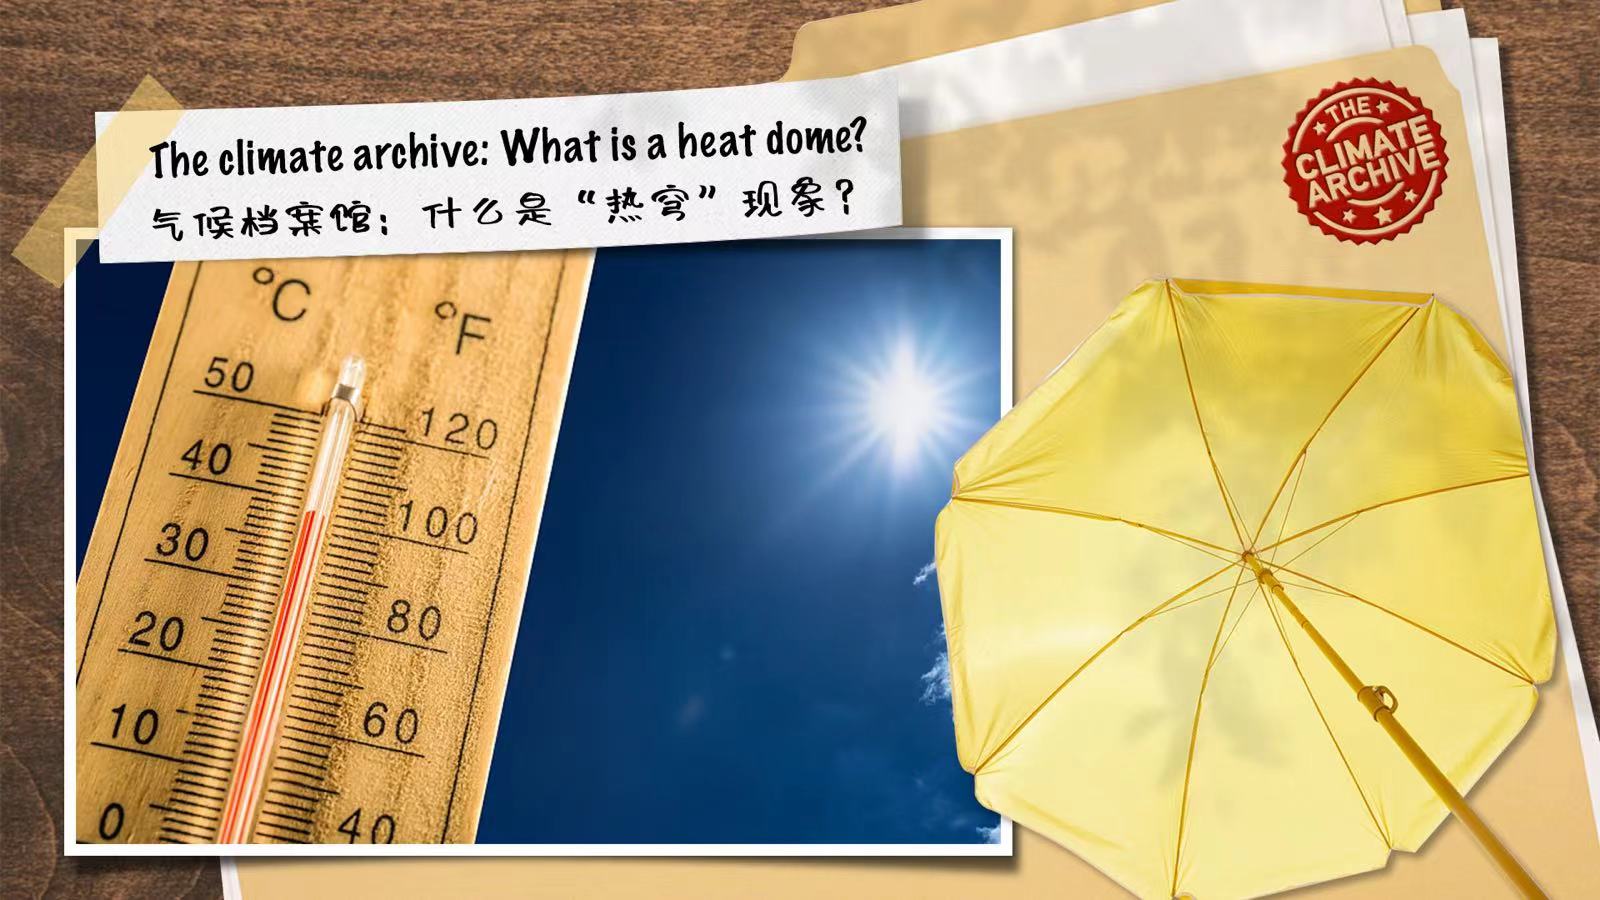 Climate archive: What is a heat dome?